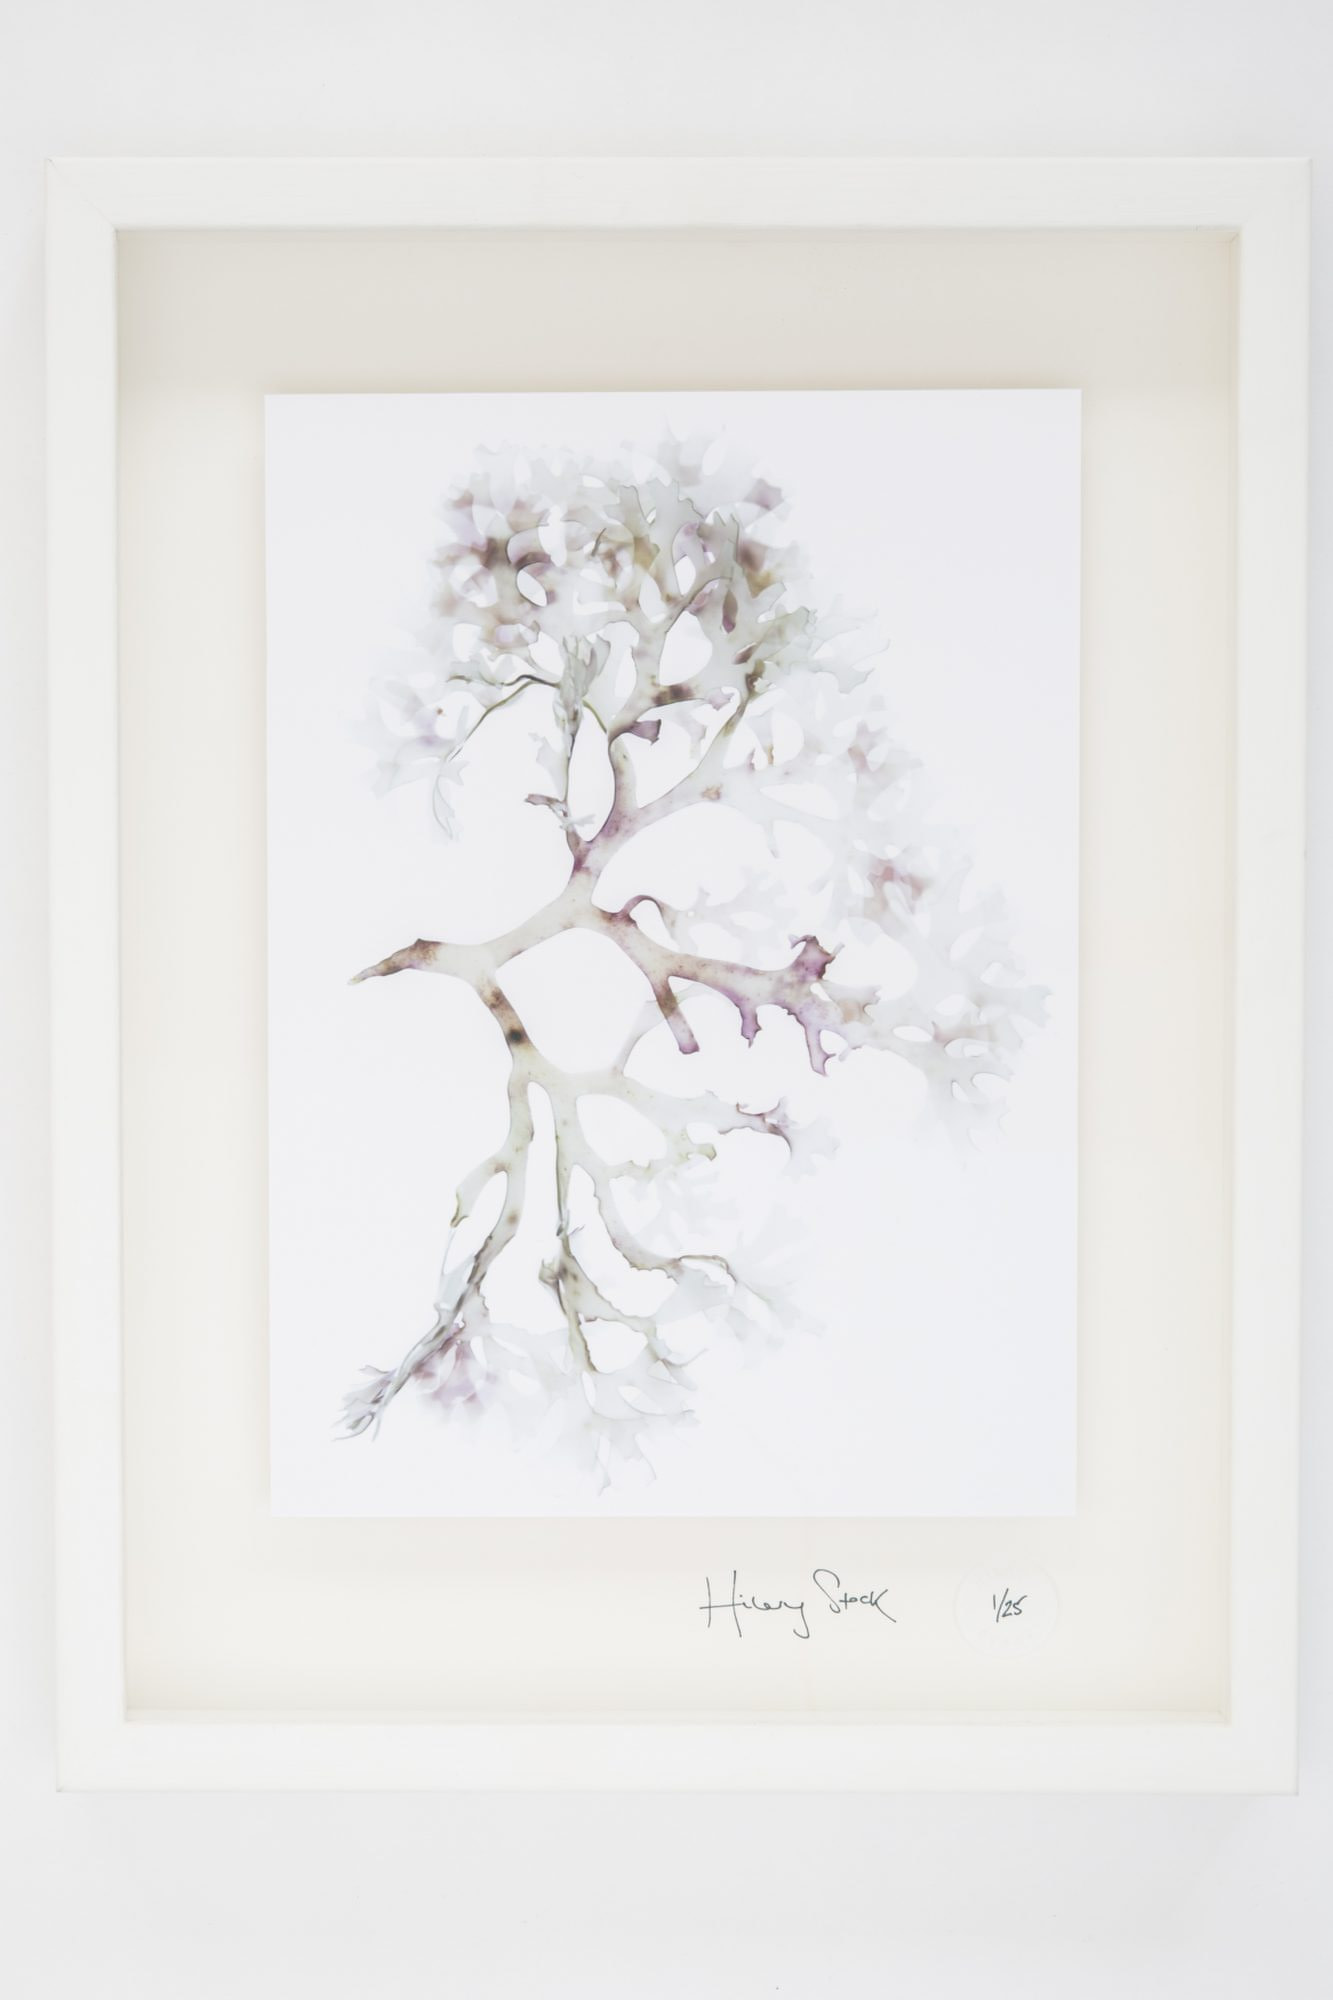 Cornish Seaweed - fine art photography from Cornwall by Hilary Stock